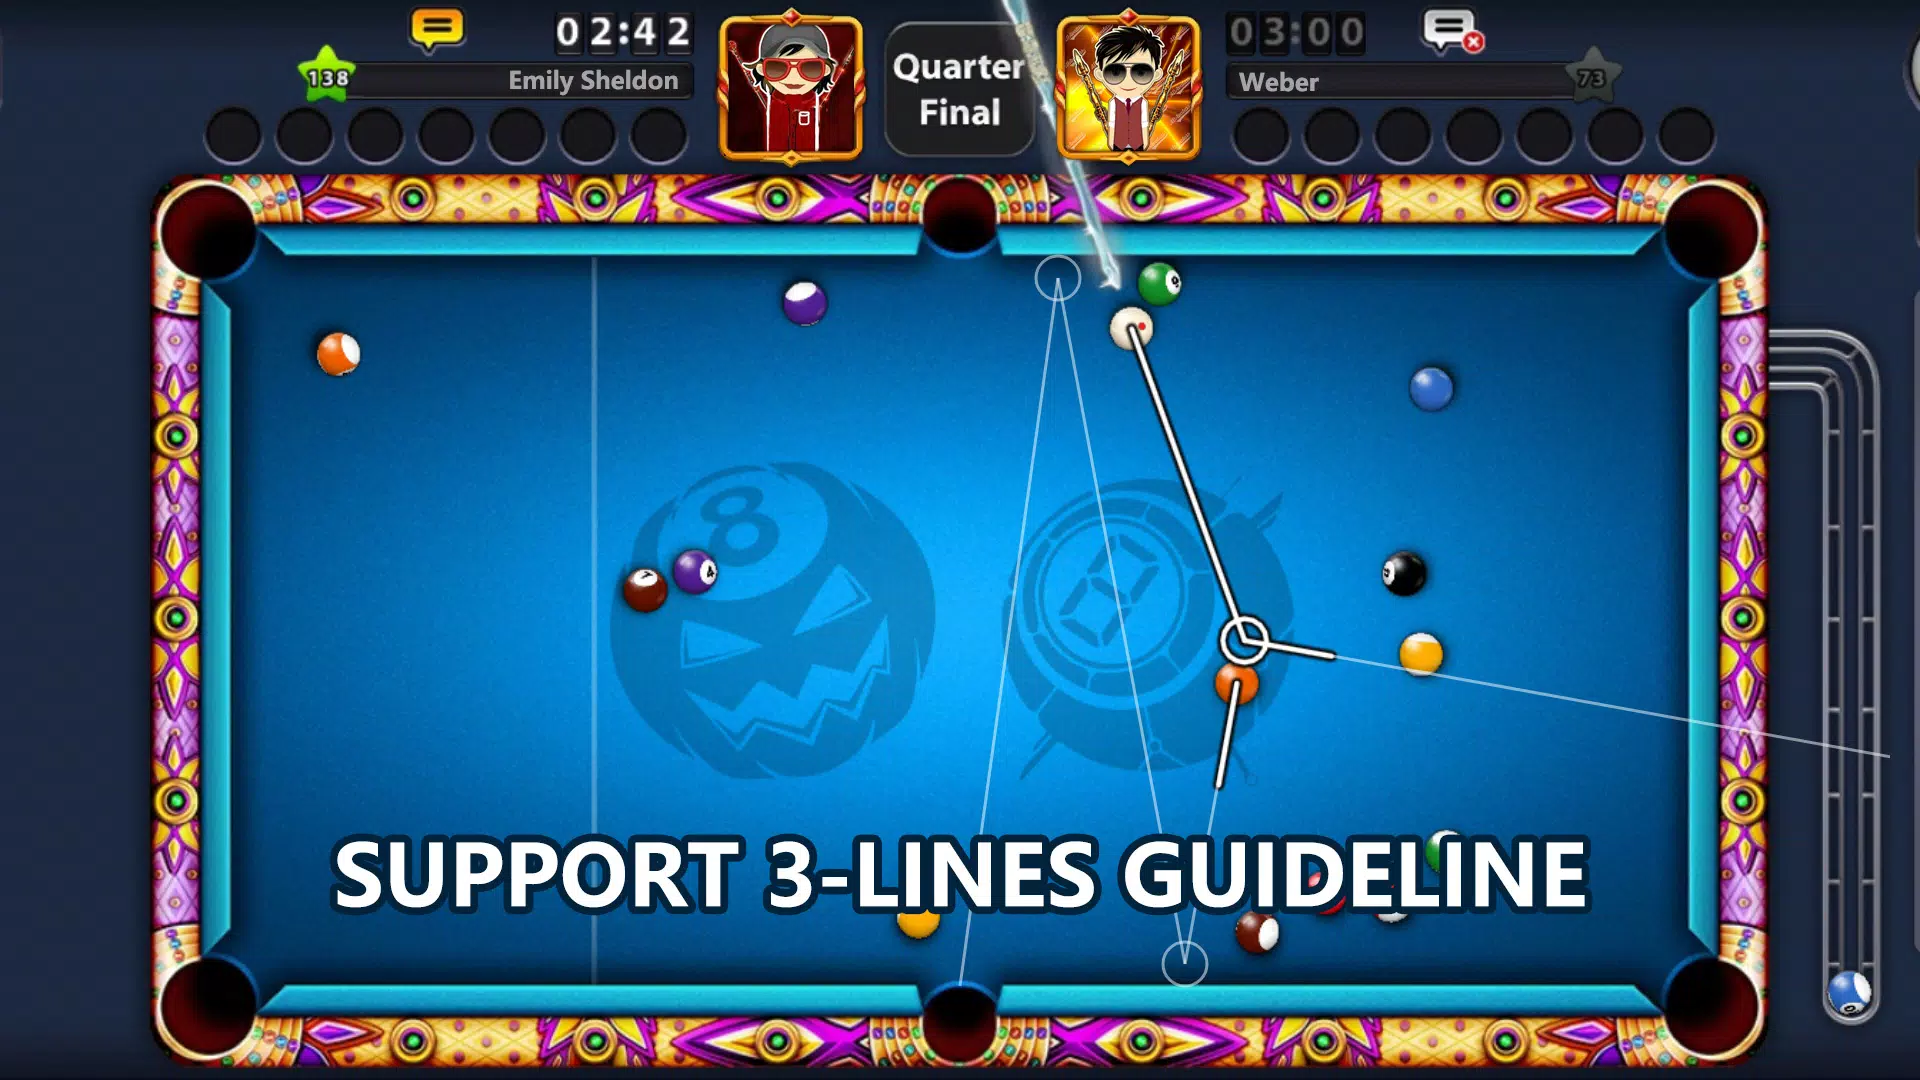 Ball Pool AImLine Pro 2.0.4 Free Download